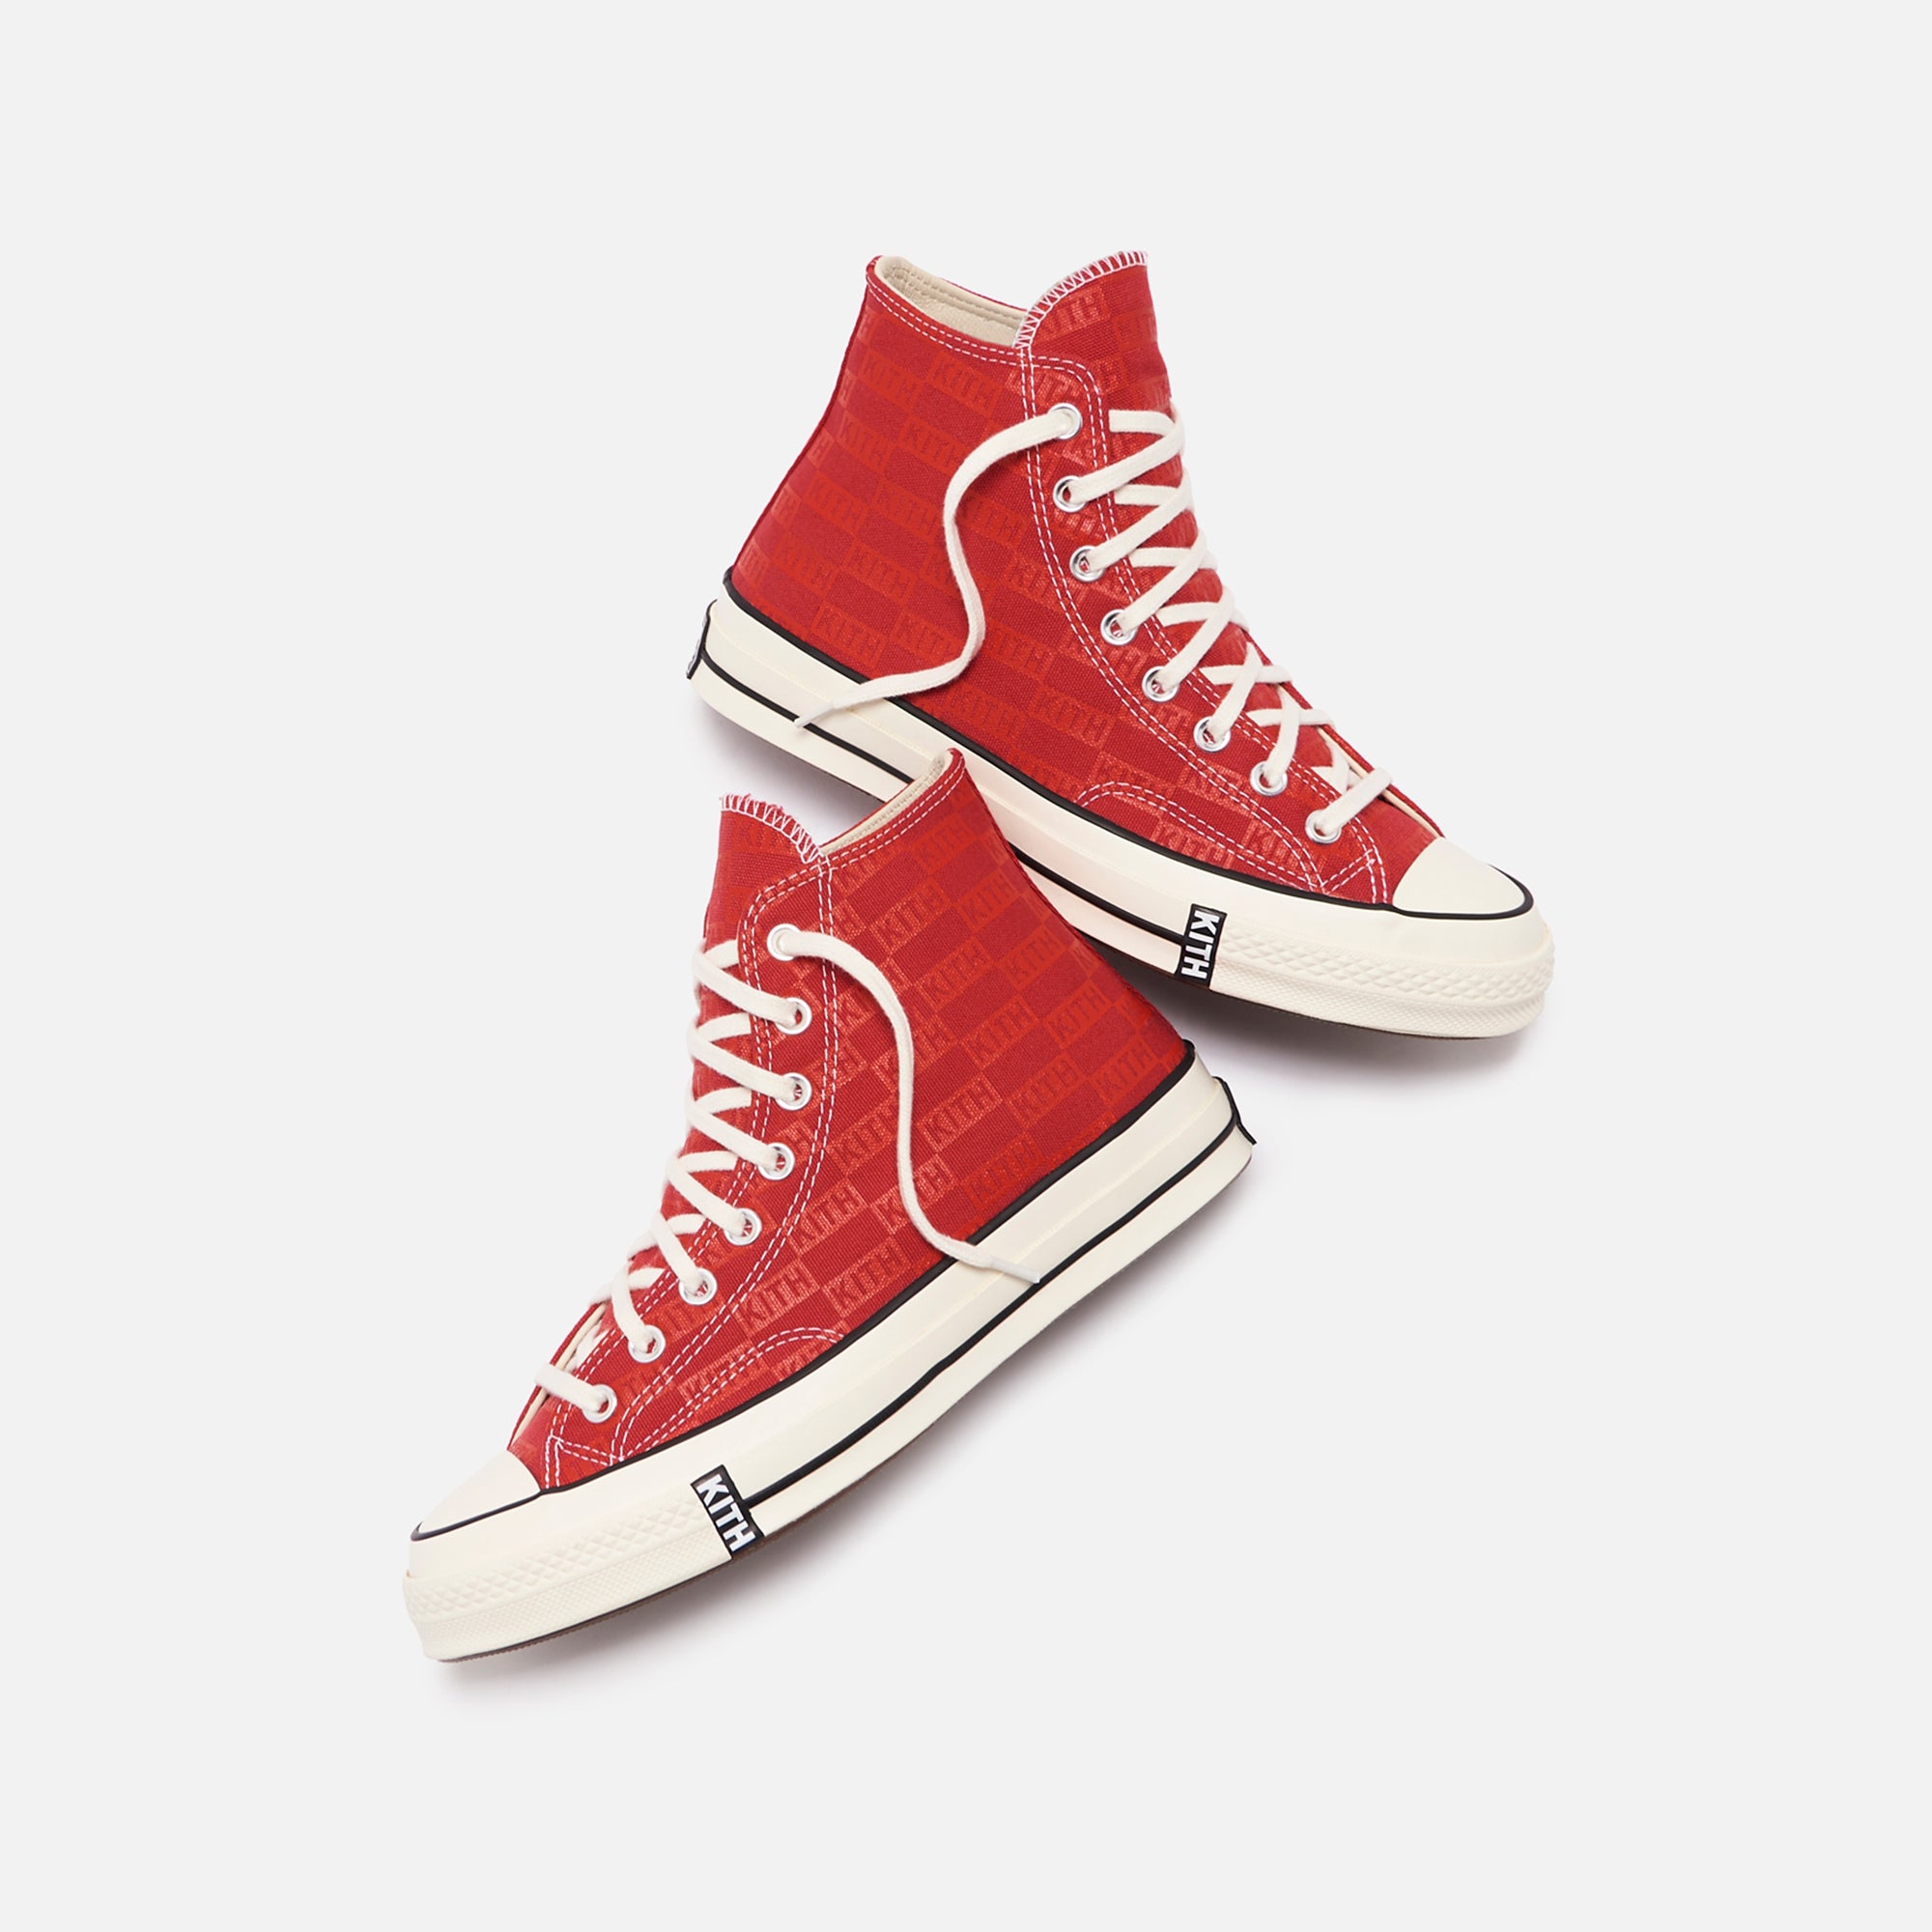 Kith x Converse Chuck Taylor 1970 Red